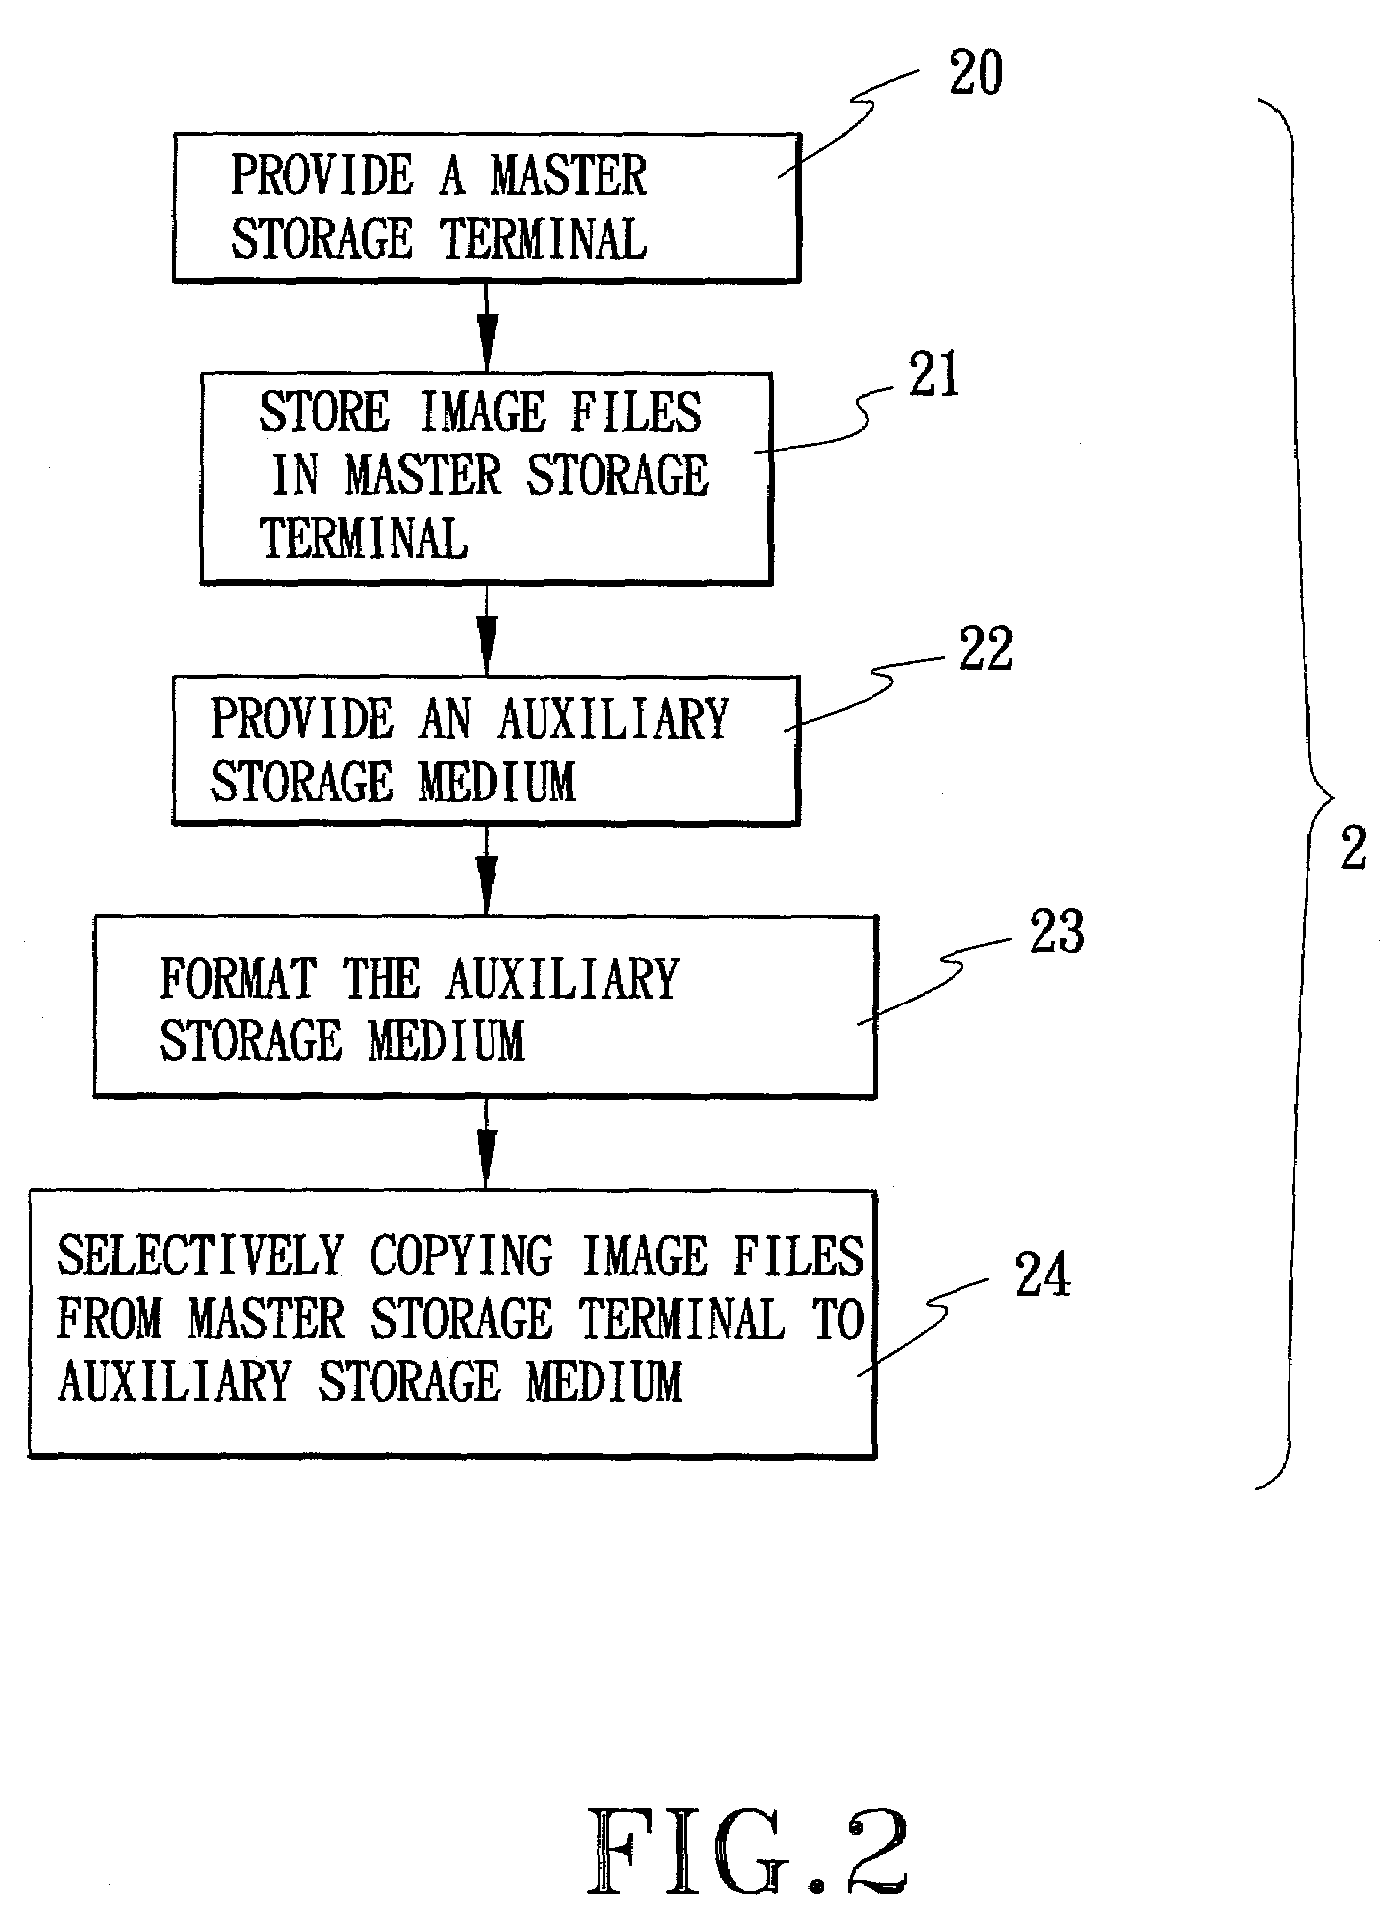 Method of creating image files and installing software bundles on target computers